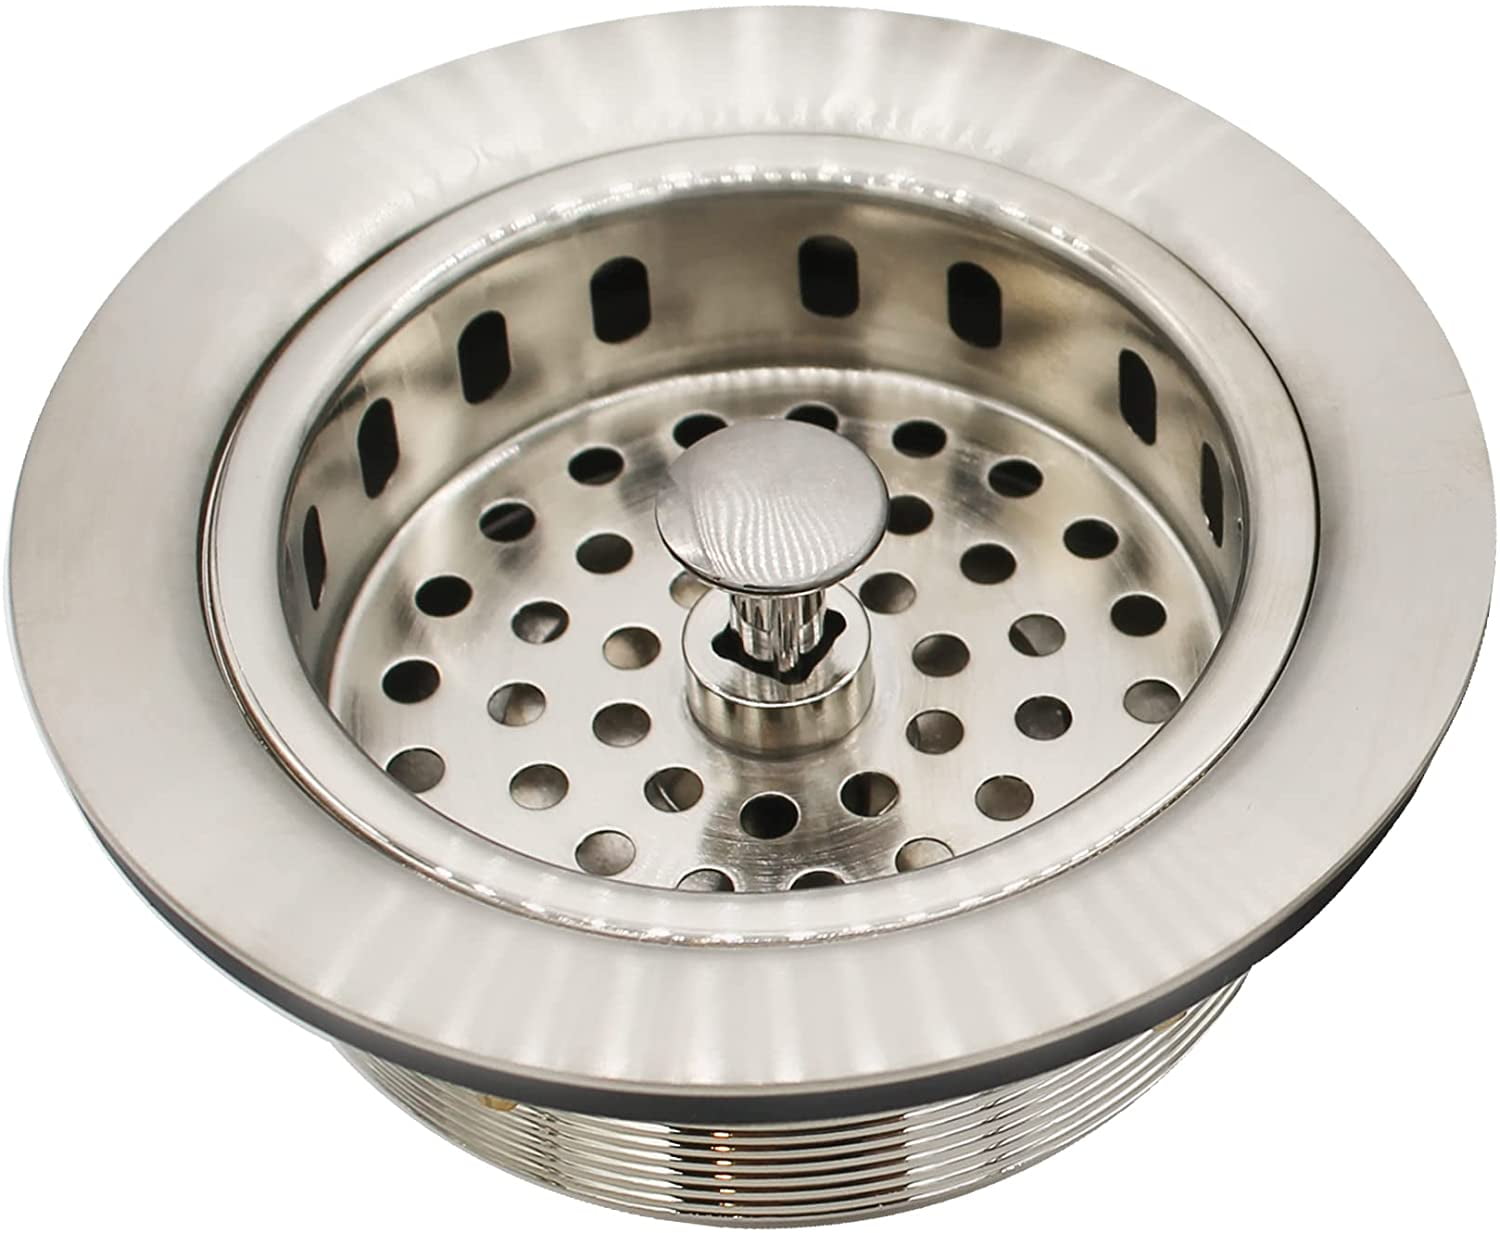 Huge Selection of Basket Strainers for Kitchen and Bar Sinks